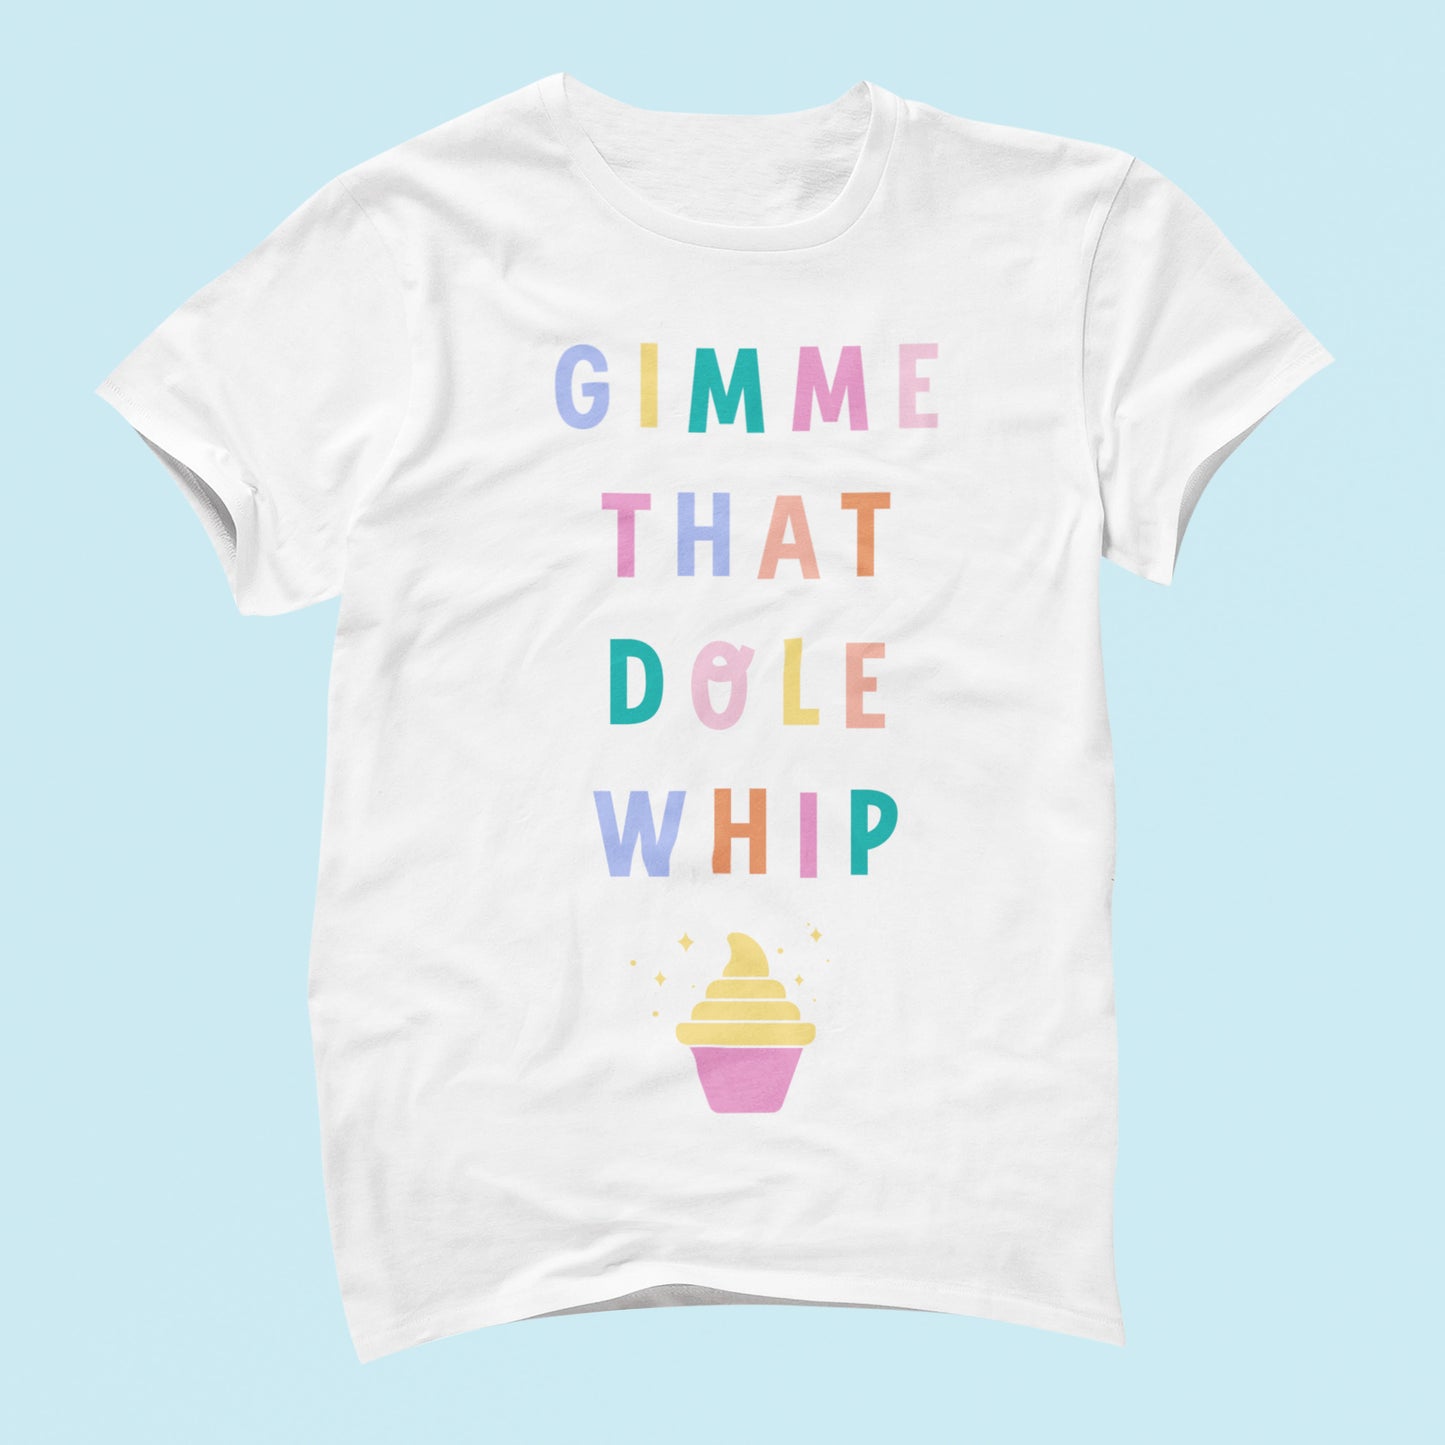 Gimme That Dole Whip Shirt